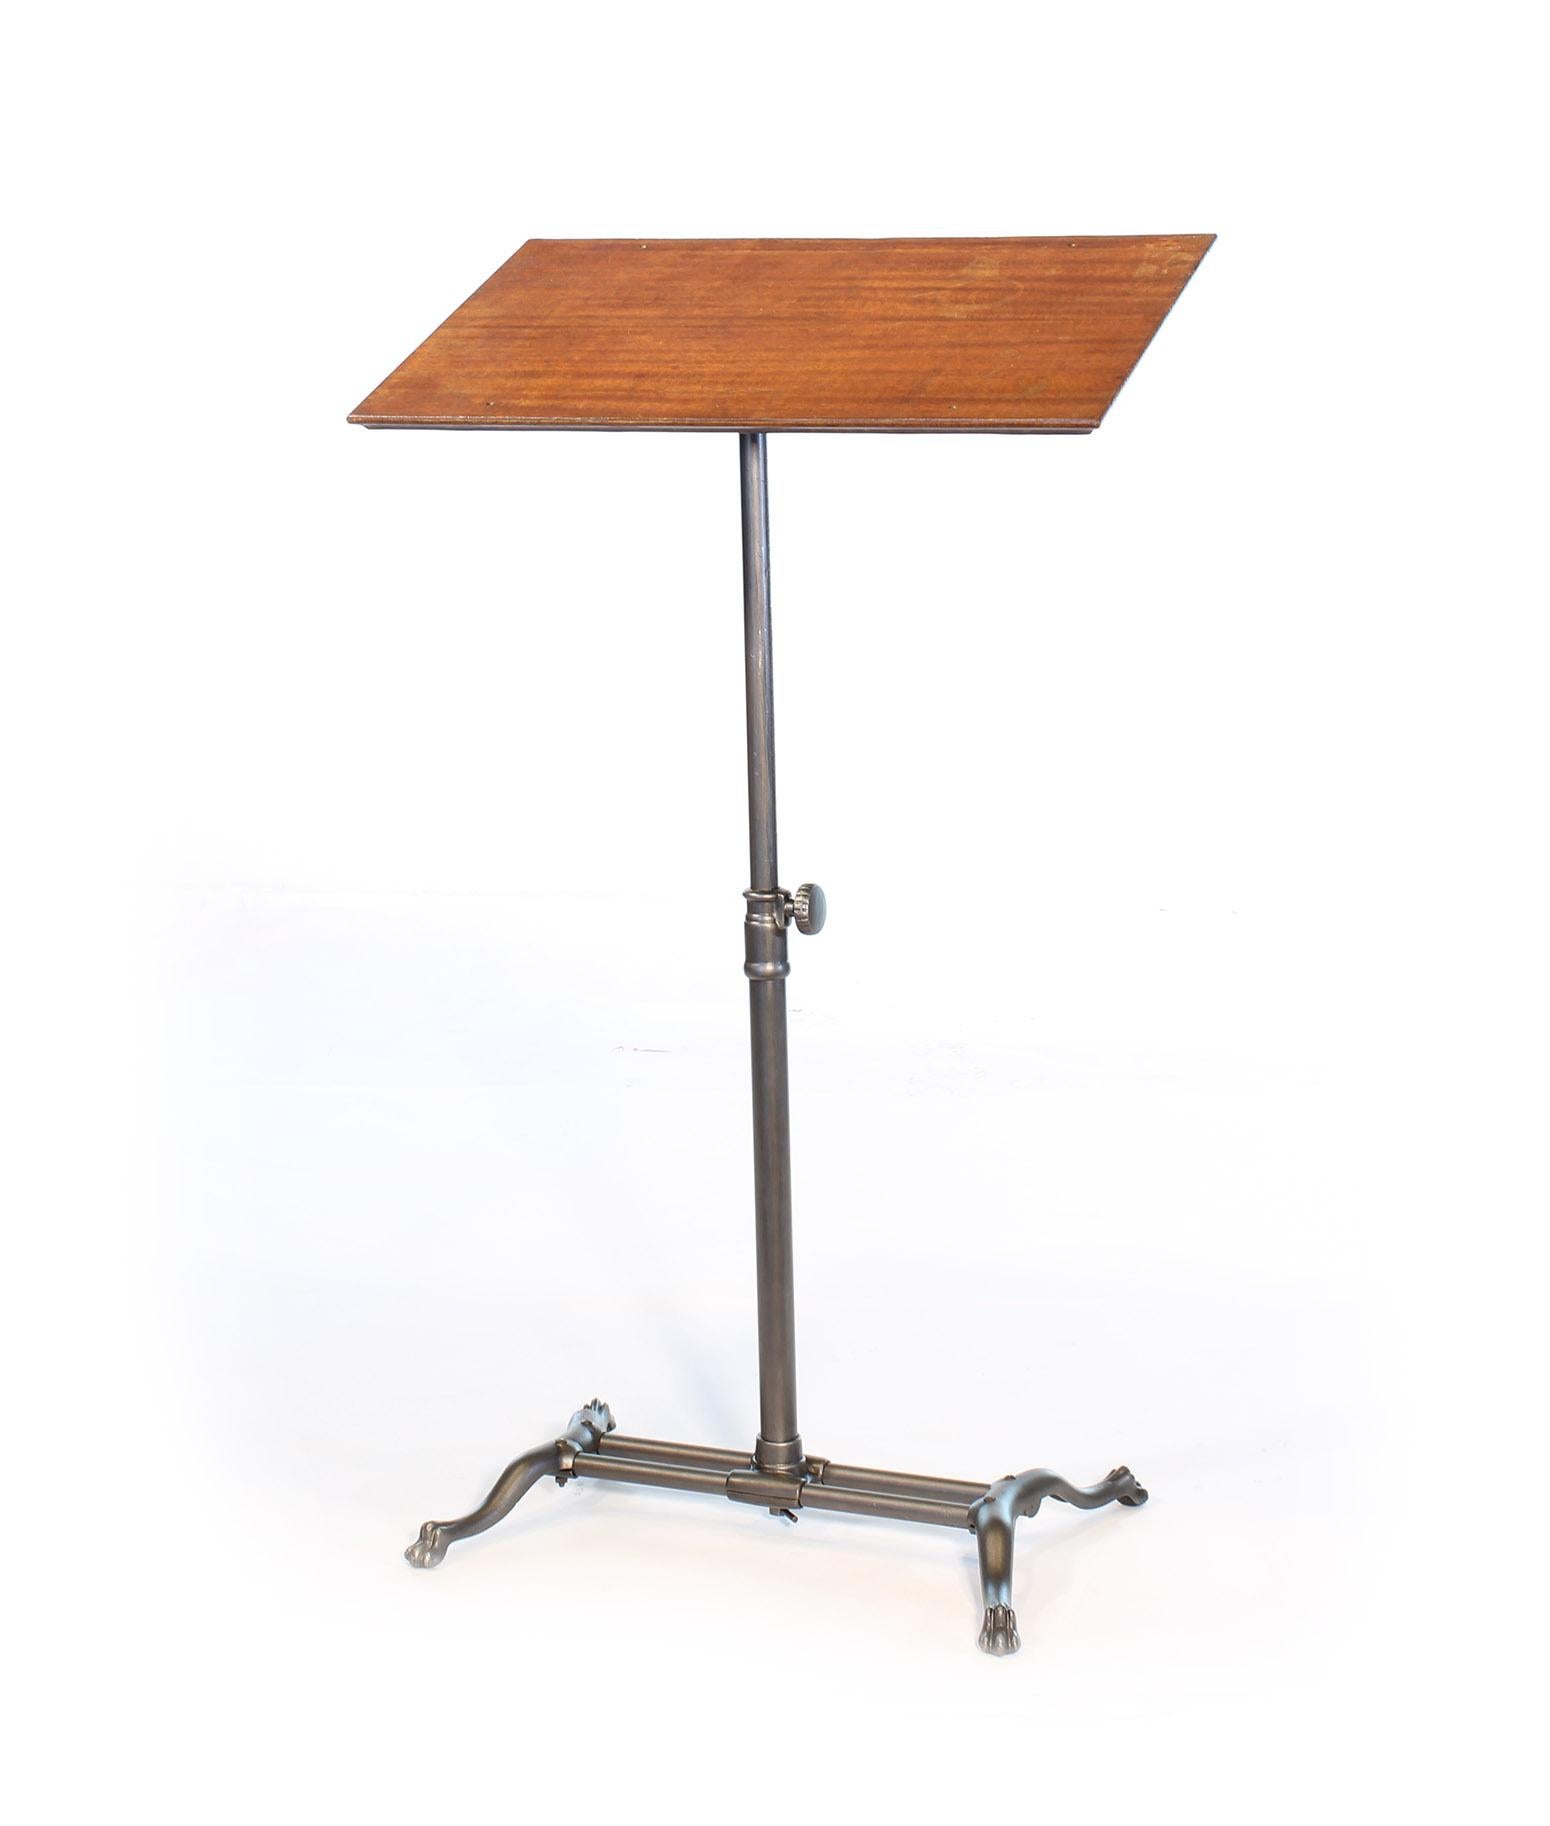 Authentic antique American fully adjustable tilt-top table (hospital bedside table, lectern, podium, music Stand, writing desk). Cast iron with mahogany top and clawfoot base. Mahogany top measures 27